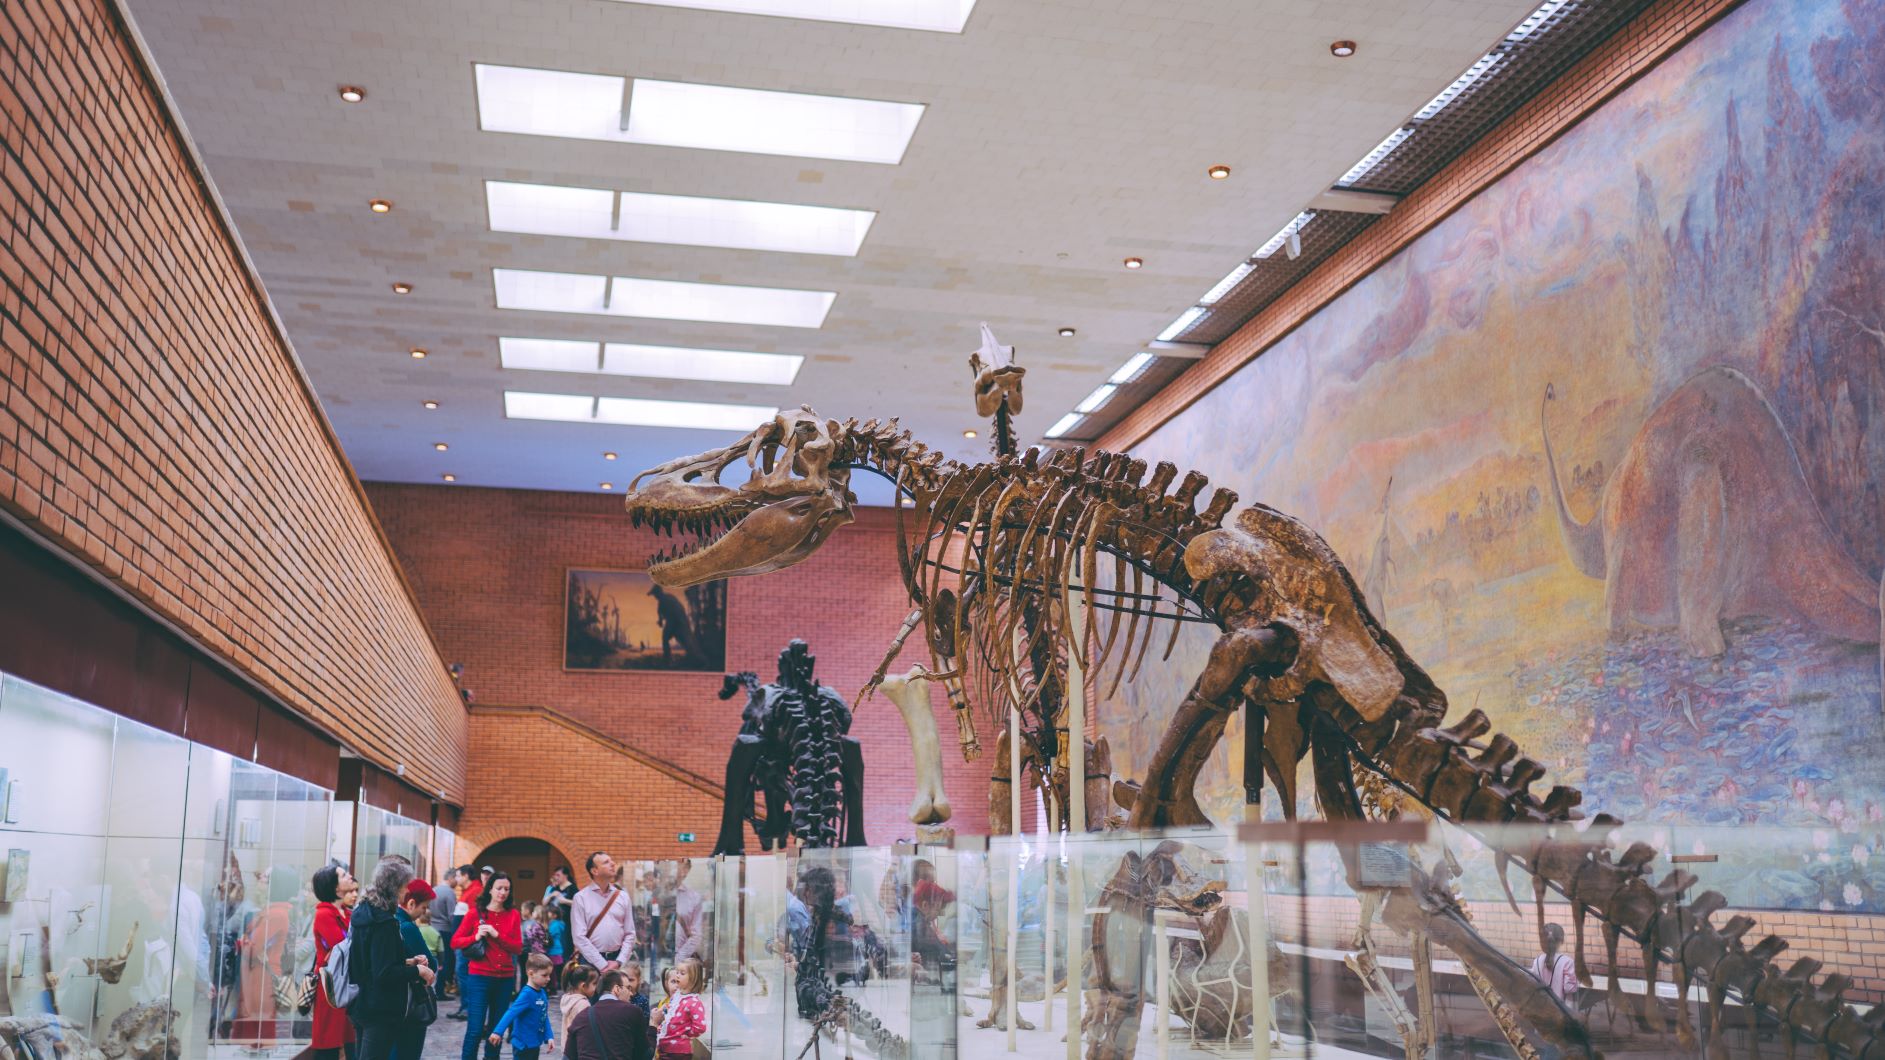 What does a traditional bookkeeper and a dinosaur have in common?